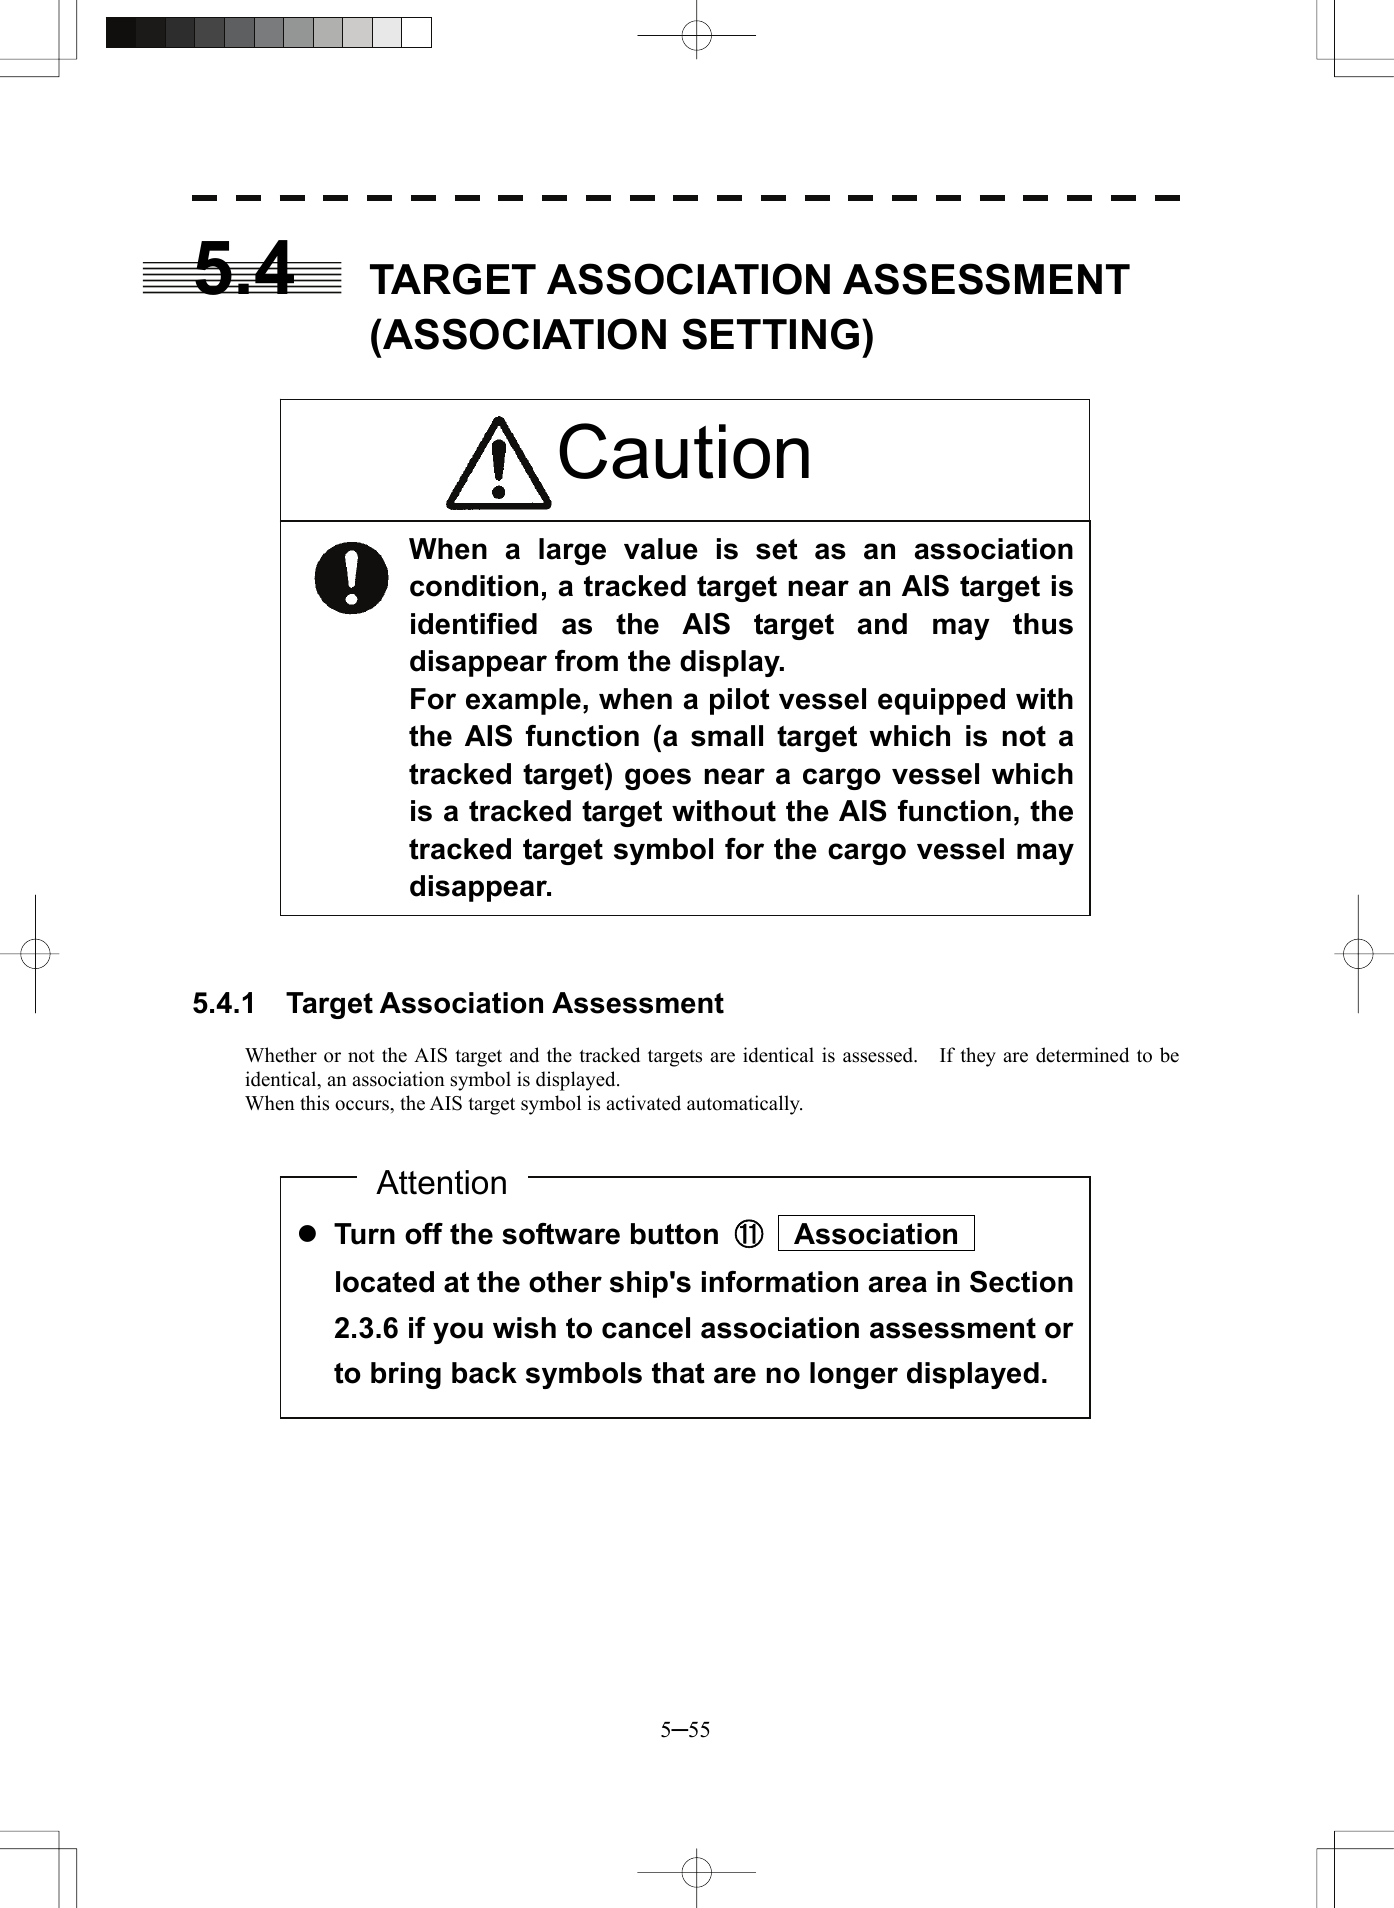  5─55 5.4  TARGET ASSOCIATION ASSESSMENT (ASSOCIATION SETTING)                    5.4.1  Target Association Assessment  Whether or not the AIS target and the tracked targets are identical is assessed.    If they are determined to be identical, an association symbol is displayed. When this occurs, the AIS target symbol is activated automatically.                  z Turn off the software button  ⑪  Association  located at the other ship&apos;s information area in Section 2.3.6 if you wish to cancel association assessment or to bring back symbols that are no longer displayed. AttentionWhen a large value is set as an association condition, a tracked target near an AIS target is identified as the AIS target and may thus disappear from the display. For example, when a pilot vessel equipped with the AIS function (a small target which is not a tracked target) goes near a cargo vessel which is a tracked target without the AIS function, the tracked target symbol for the cargo vessel may disappear. Caution 